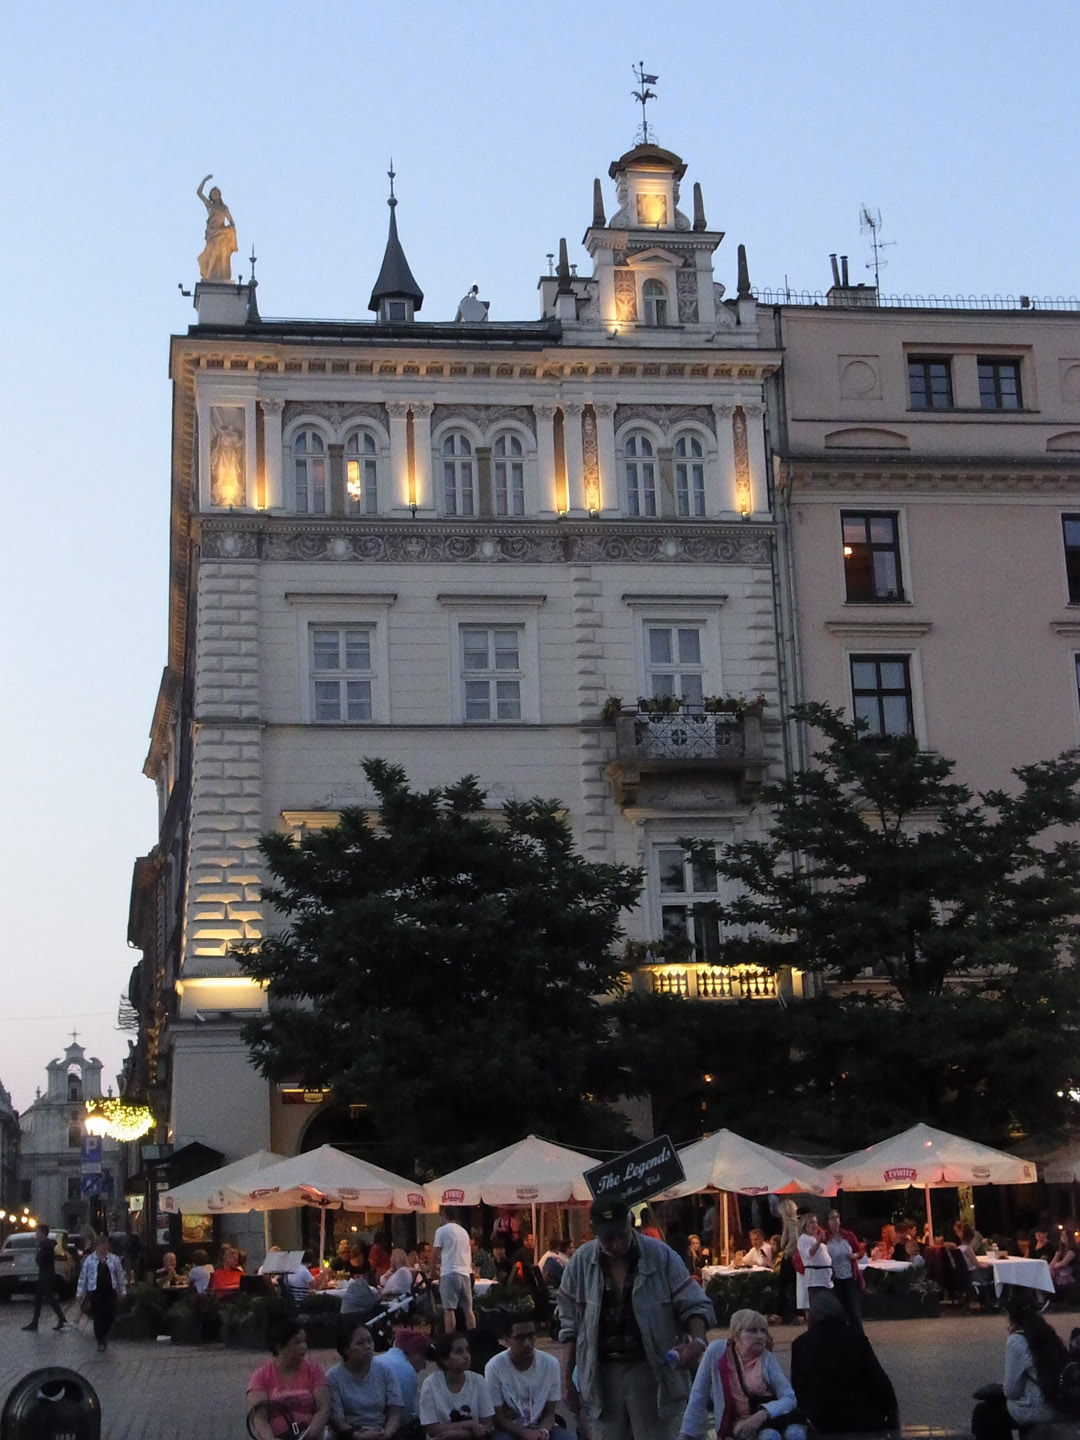 Restaurants on the Town Square